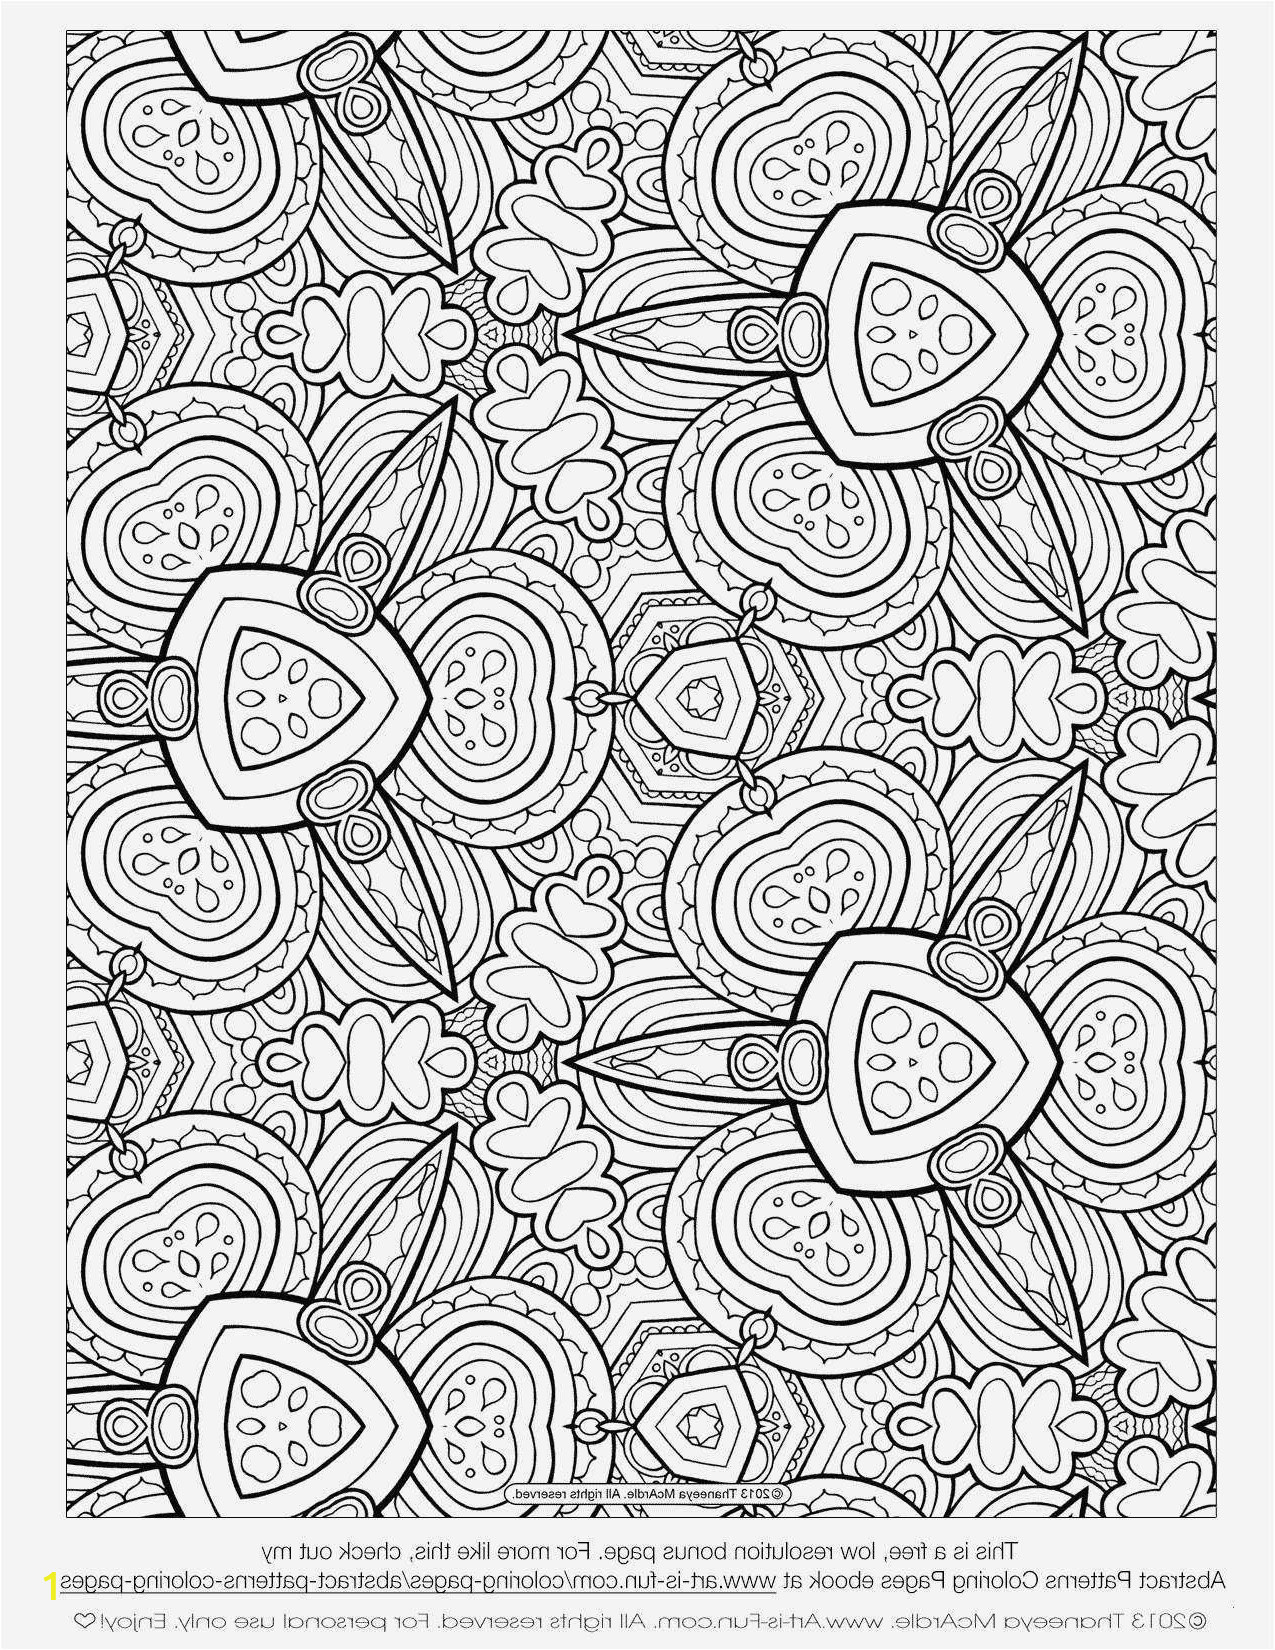 high resolution coloring book images cool images dc coloring pages inspirational superhero 0 0d throughout goosebumps of high resolution coloring book images